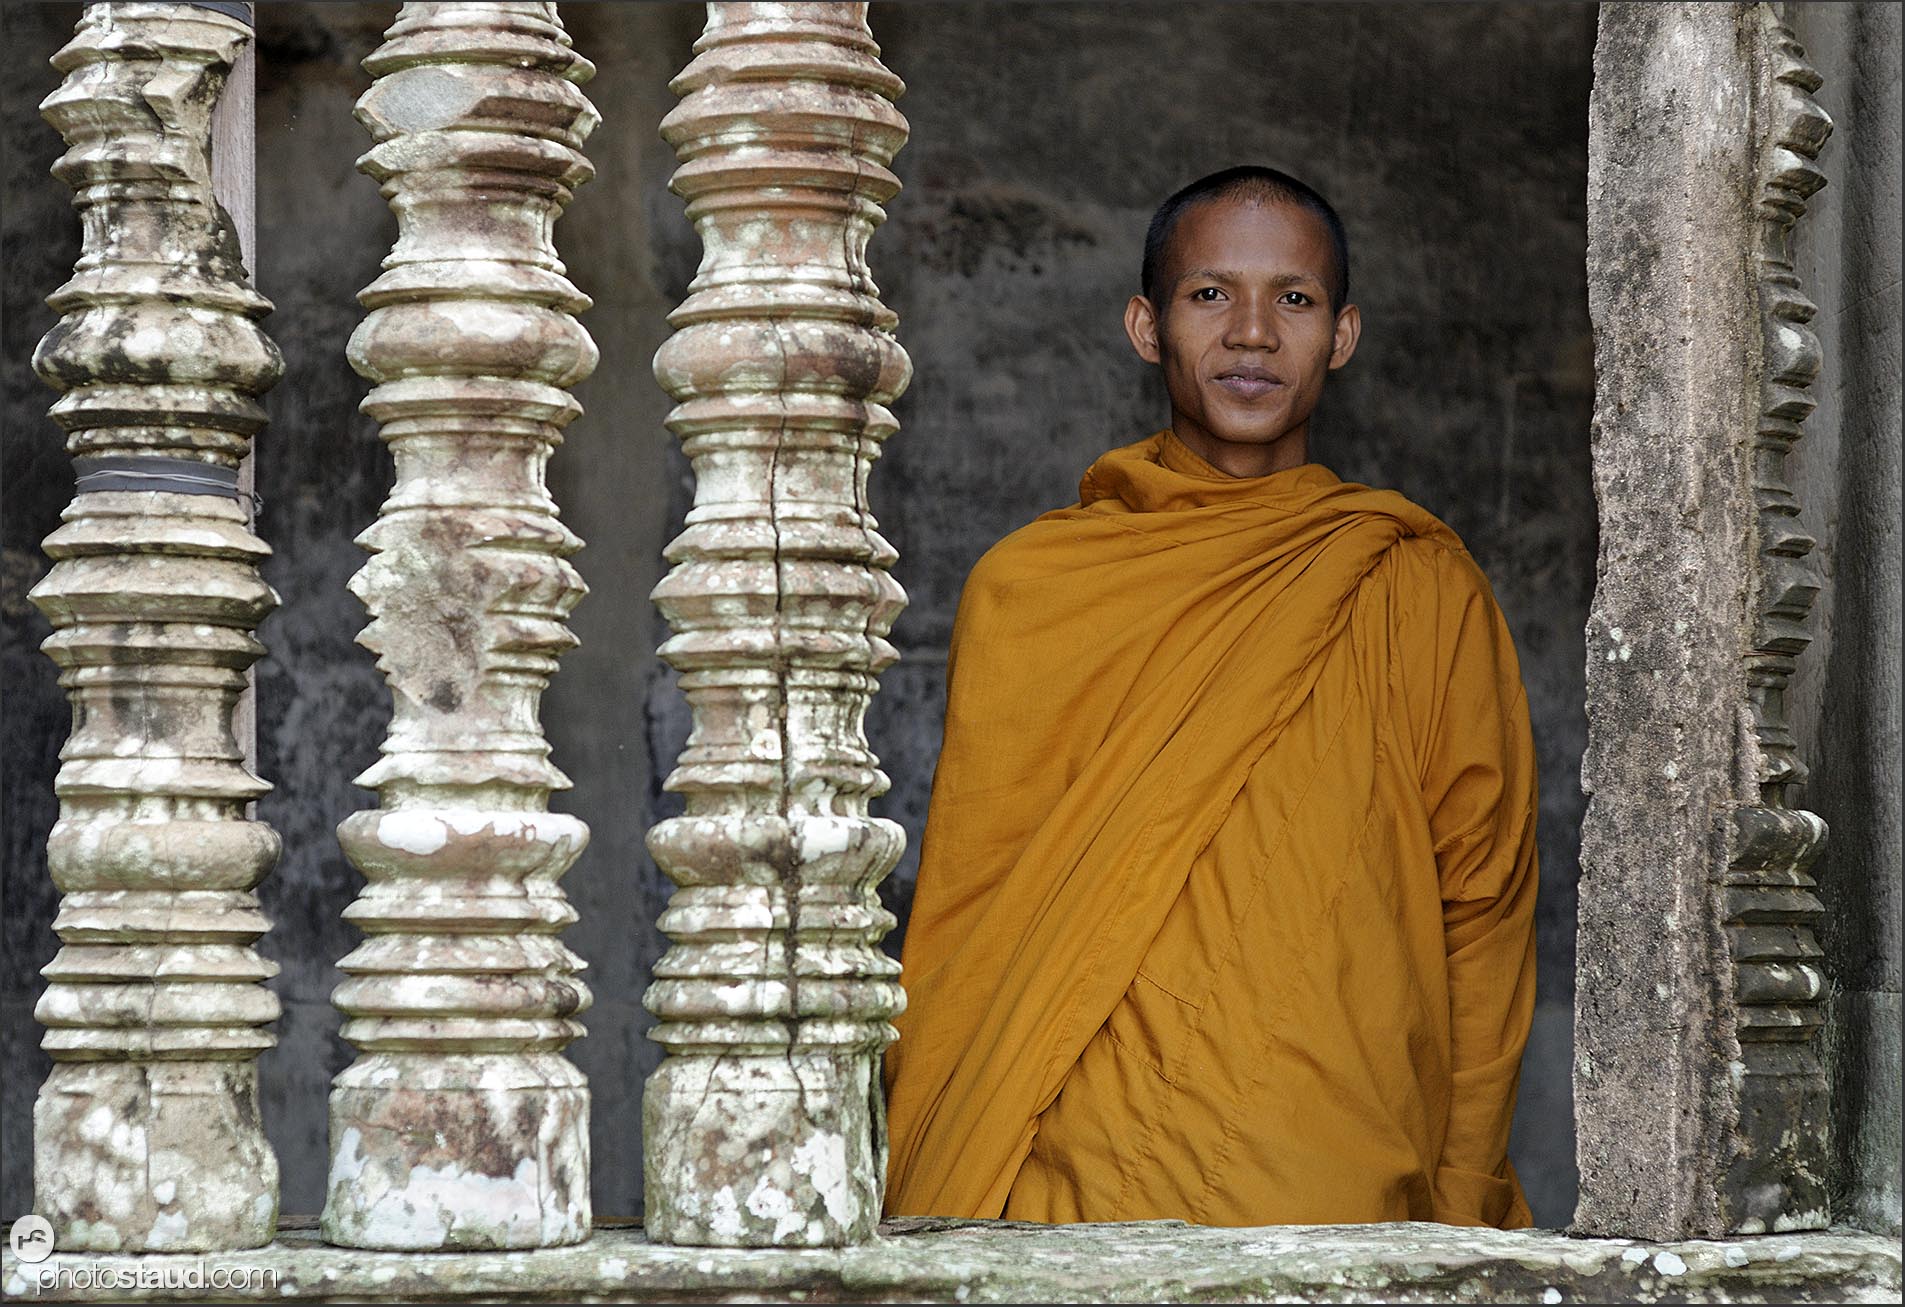 Stone columns and Buddhist monk in Angkor Wat, Cambodia